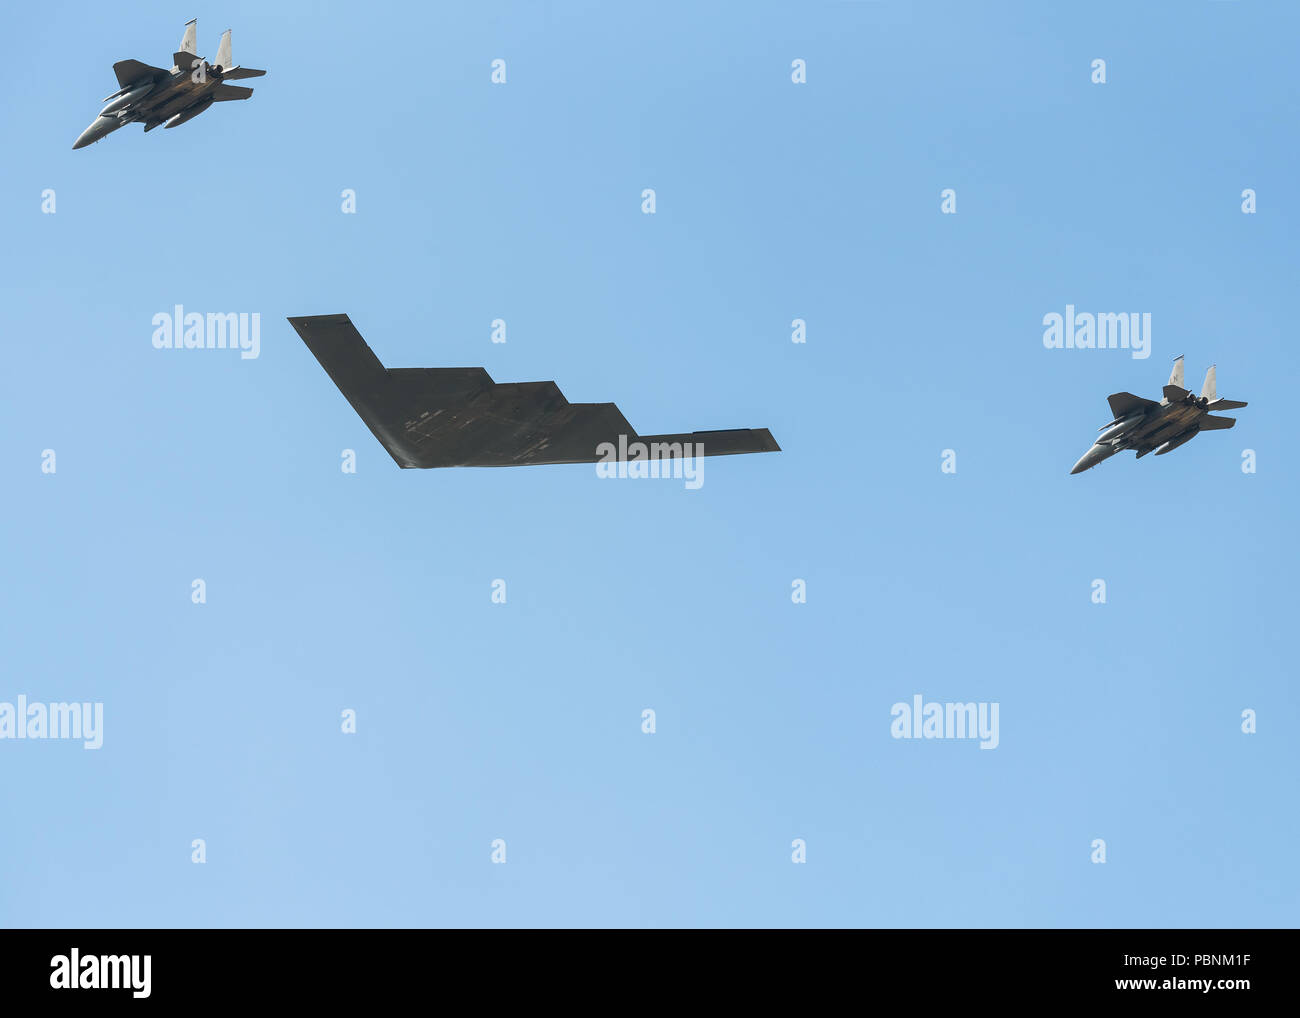 The Spirit of New York Northrop B-2 Stealth Bomber escorted by 2 RAF F-15 eagle fighter jets does a flyover display at RIAT Fairford 2018, UK. Stock Photo